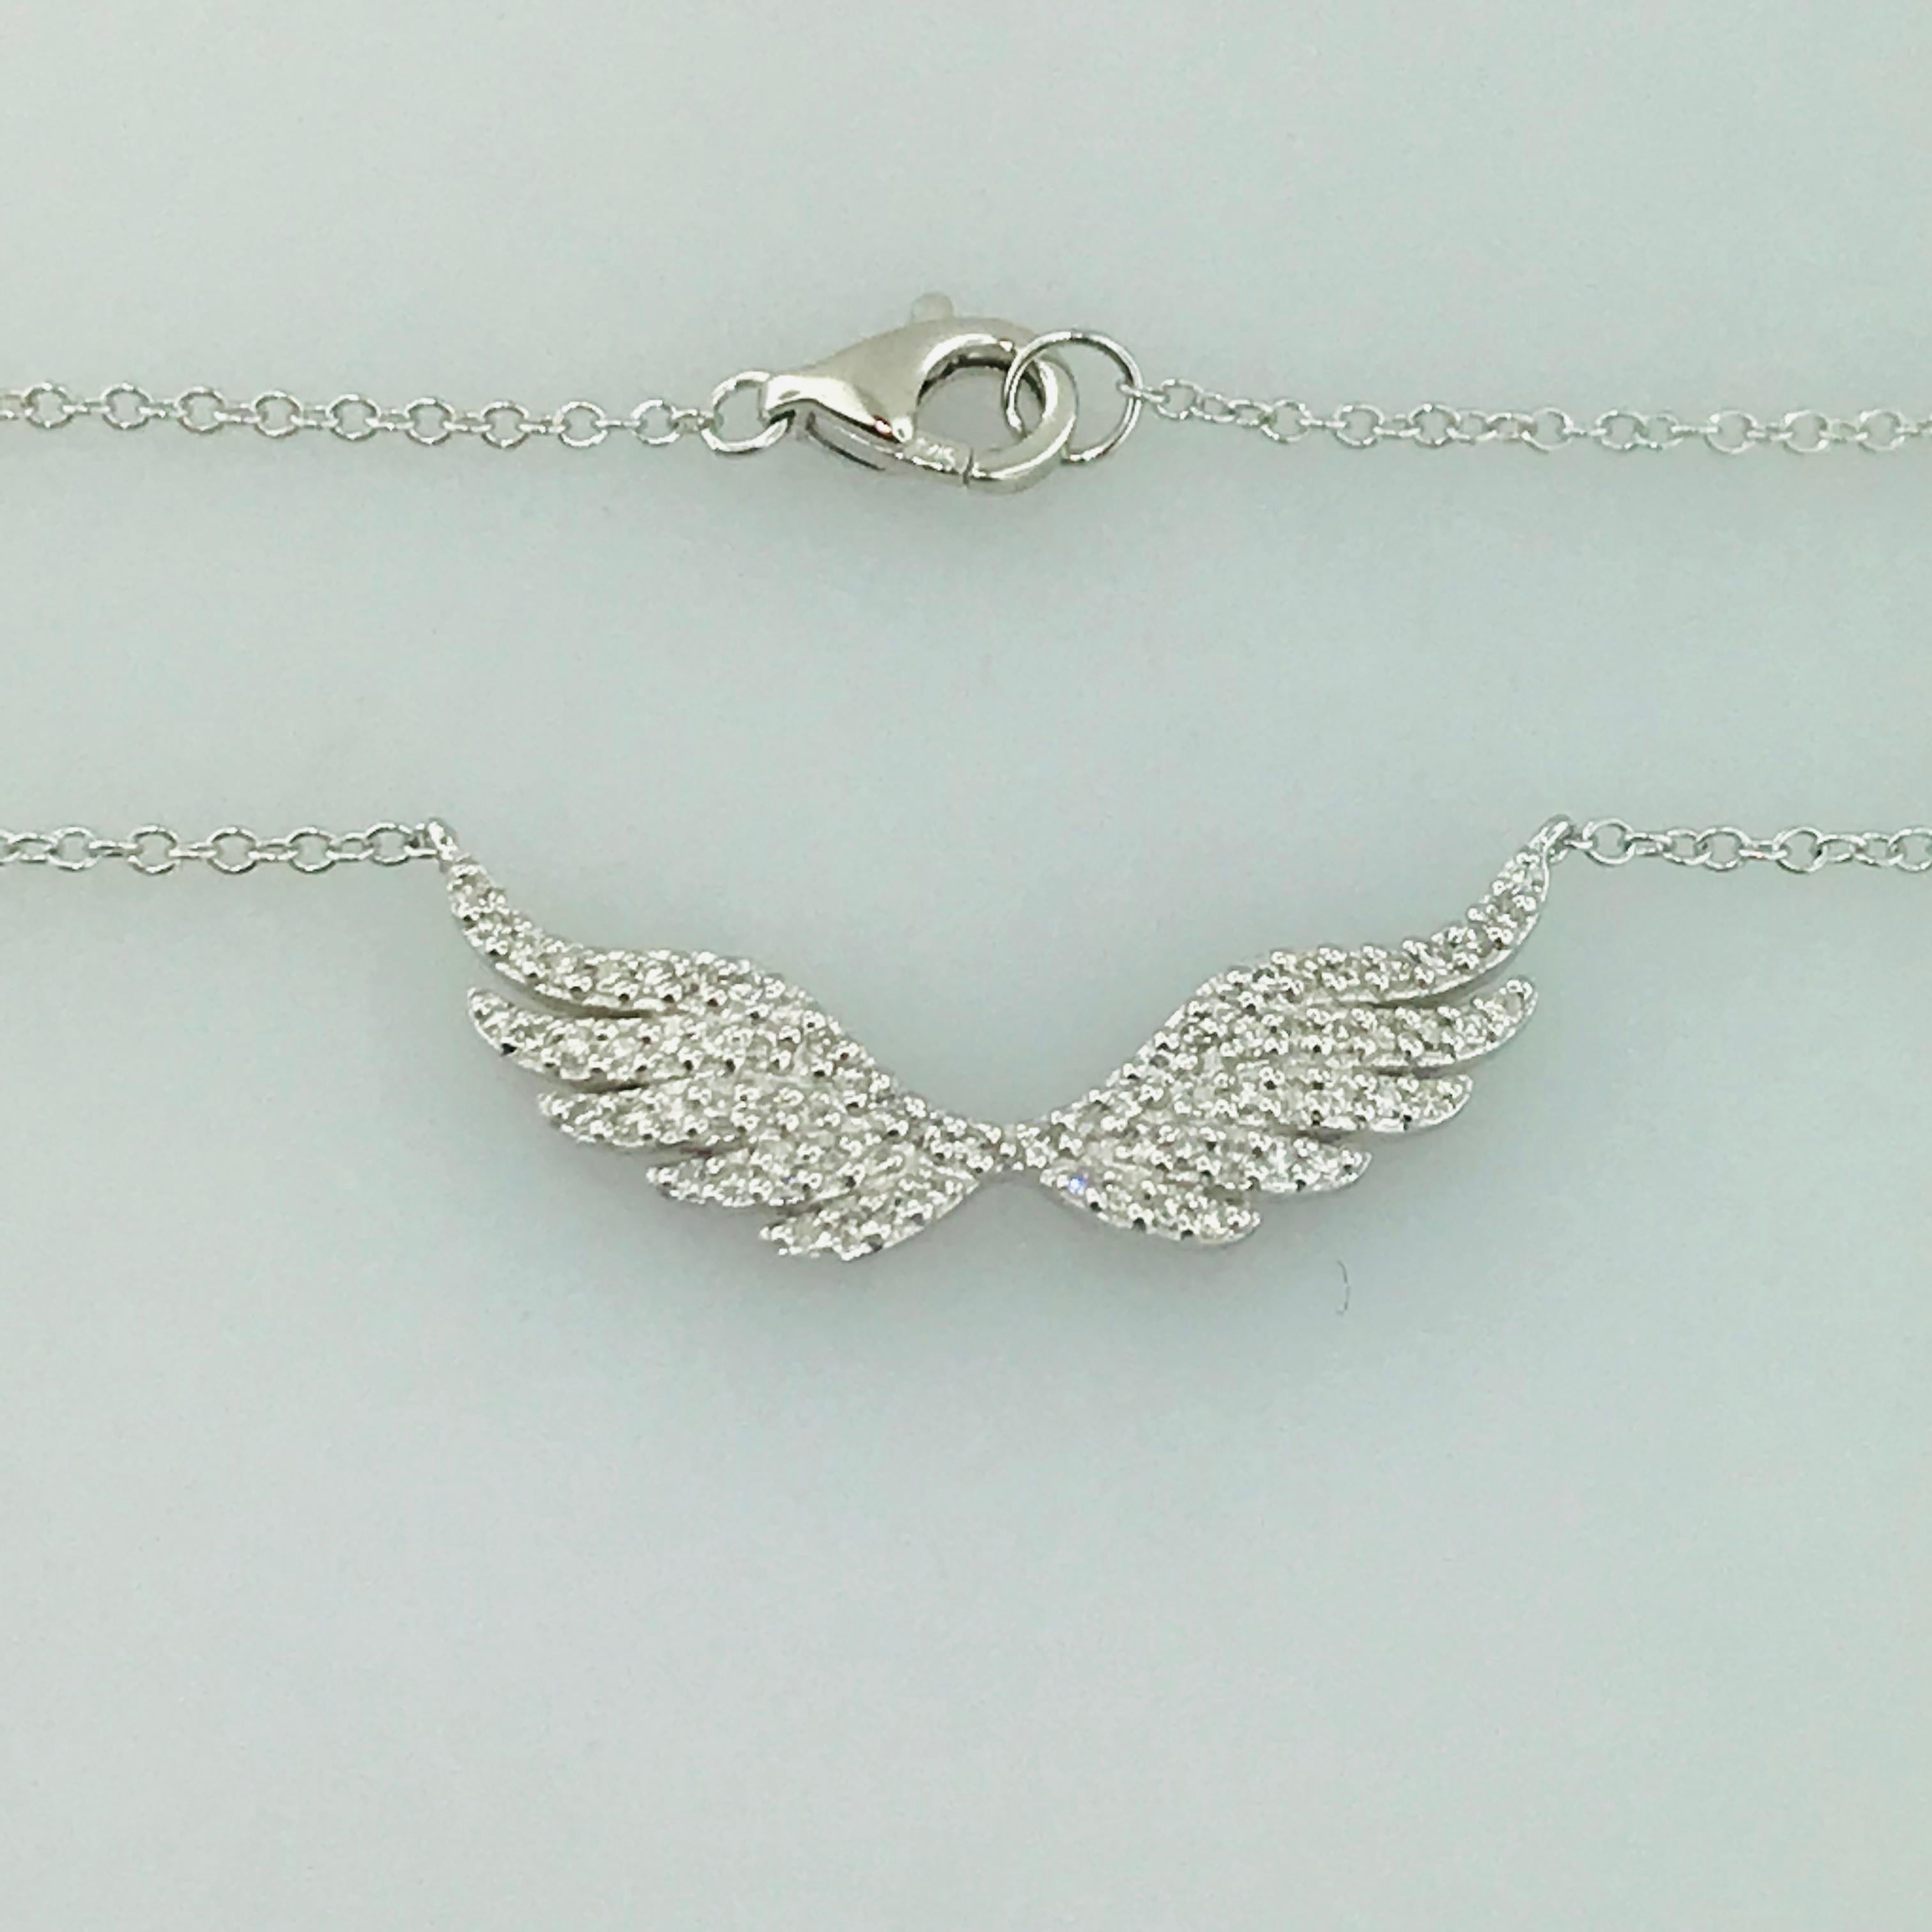 How sweet and precious is this diamond angel wings necklace? It is truly special and beautiful. What a great piece to wear every day or a great gift for someone deserving. This adorable diamond angel wing necklace has grace, beauty and bling! The